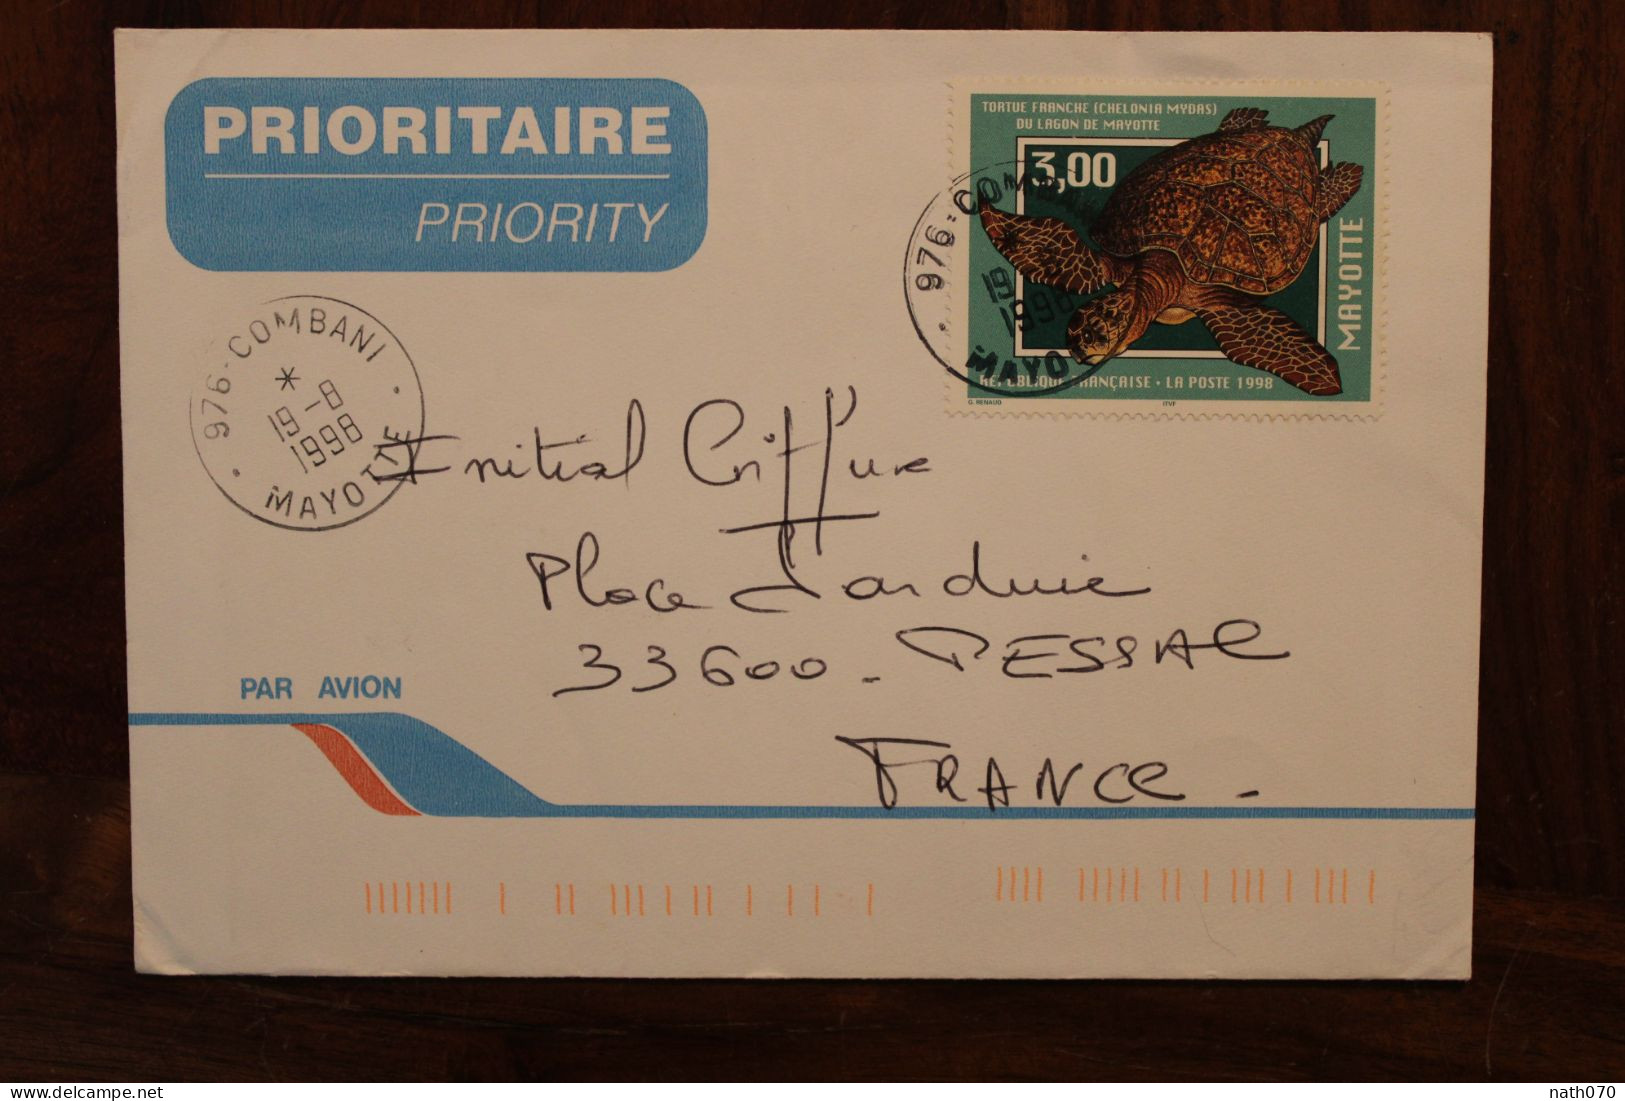 1998 Mayotte Combani France Cover Timbre Tortue Franche Air Mail - Lettres & Documents